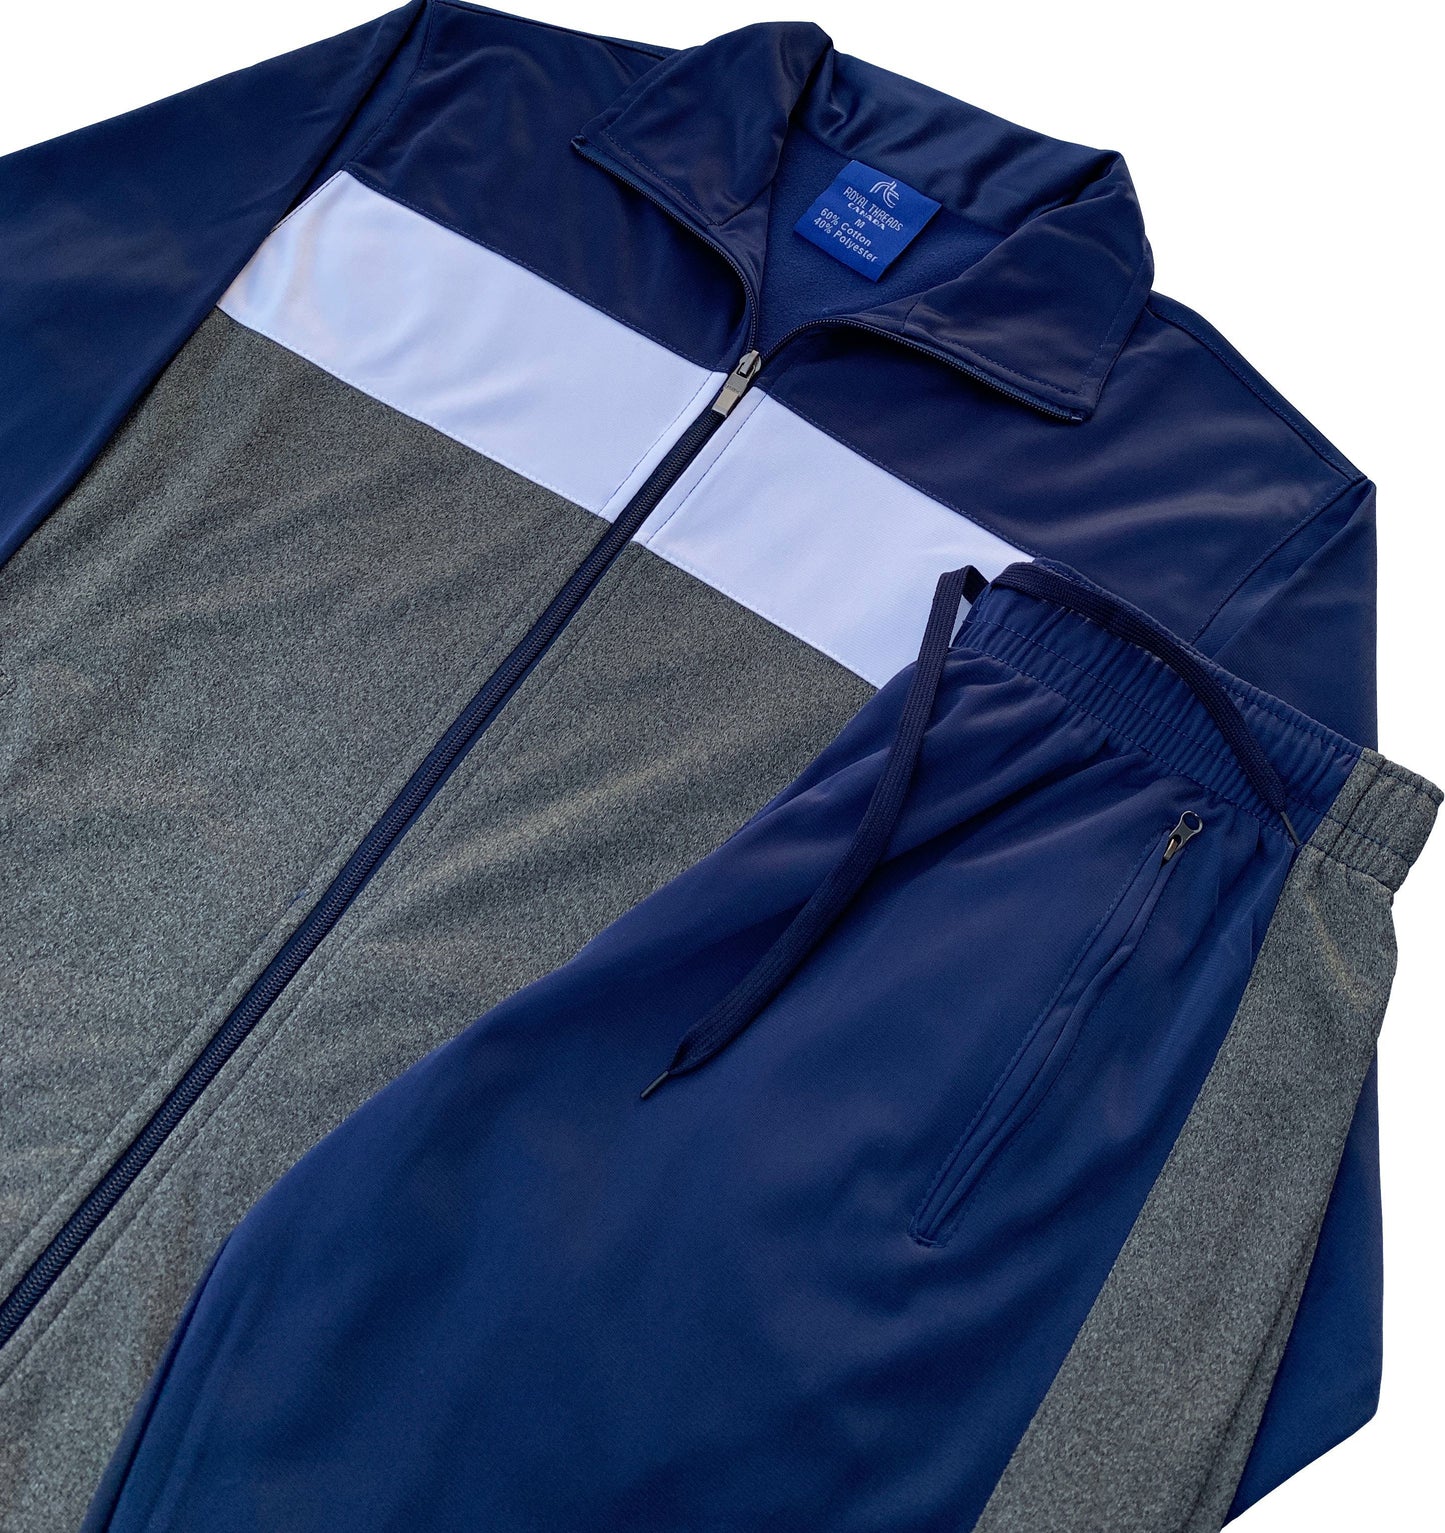 Men's Moonstone Jogger Track Jacket and Track Pants Outfit